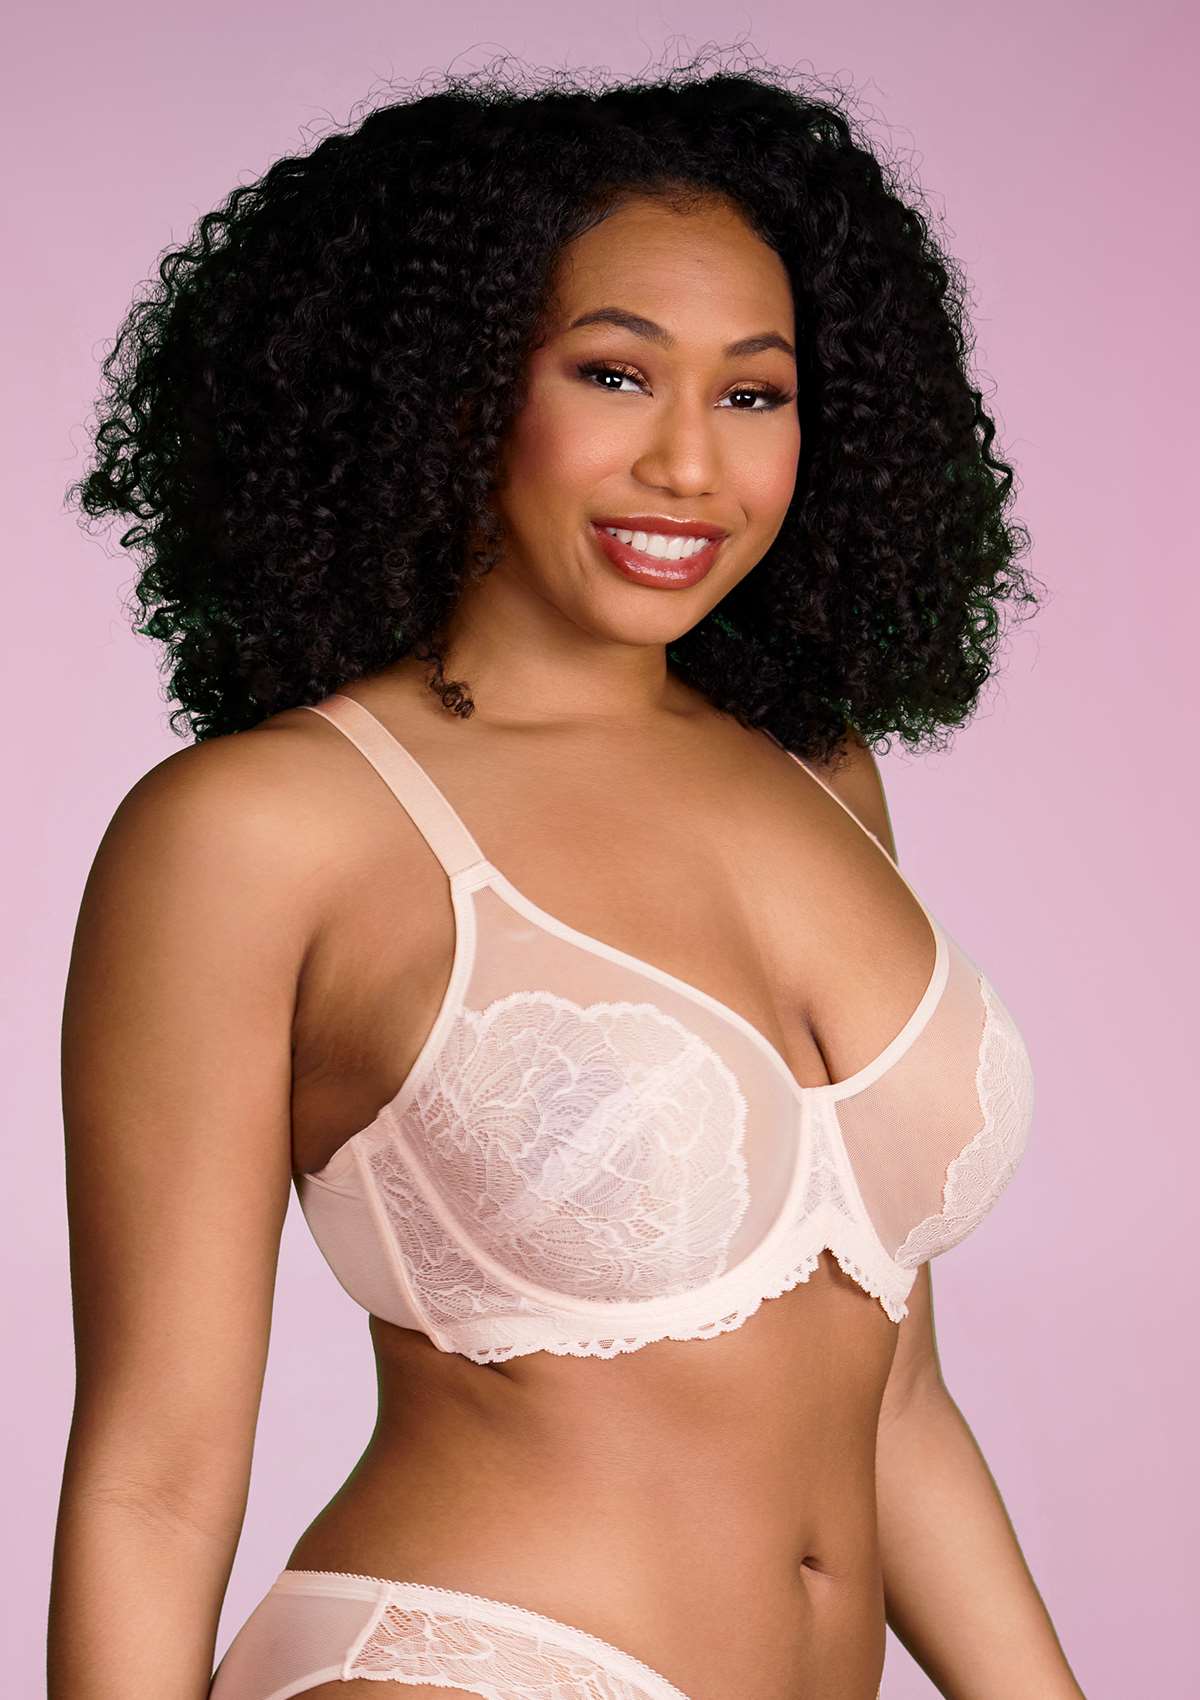 HSIA Blossom Sheer Lace Bra: Comfortable Underwire Bra For Big Busts - White / 34 / C